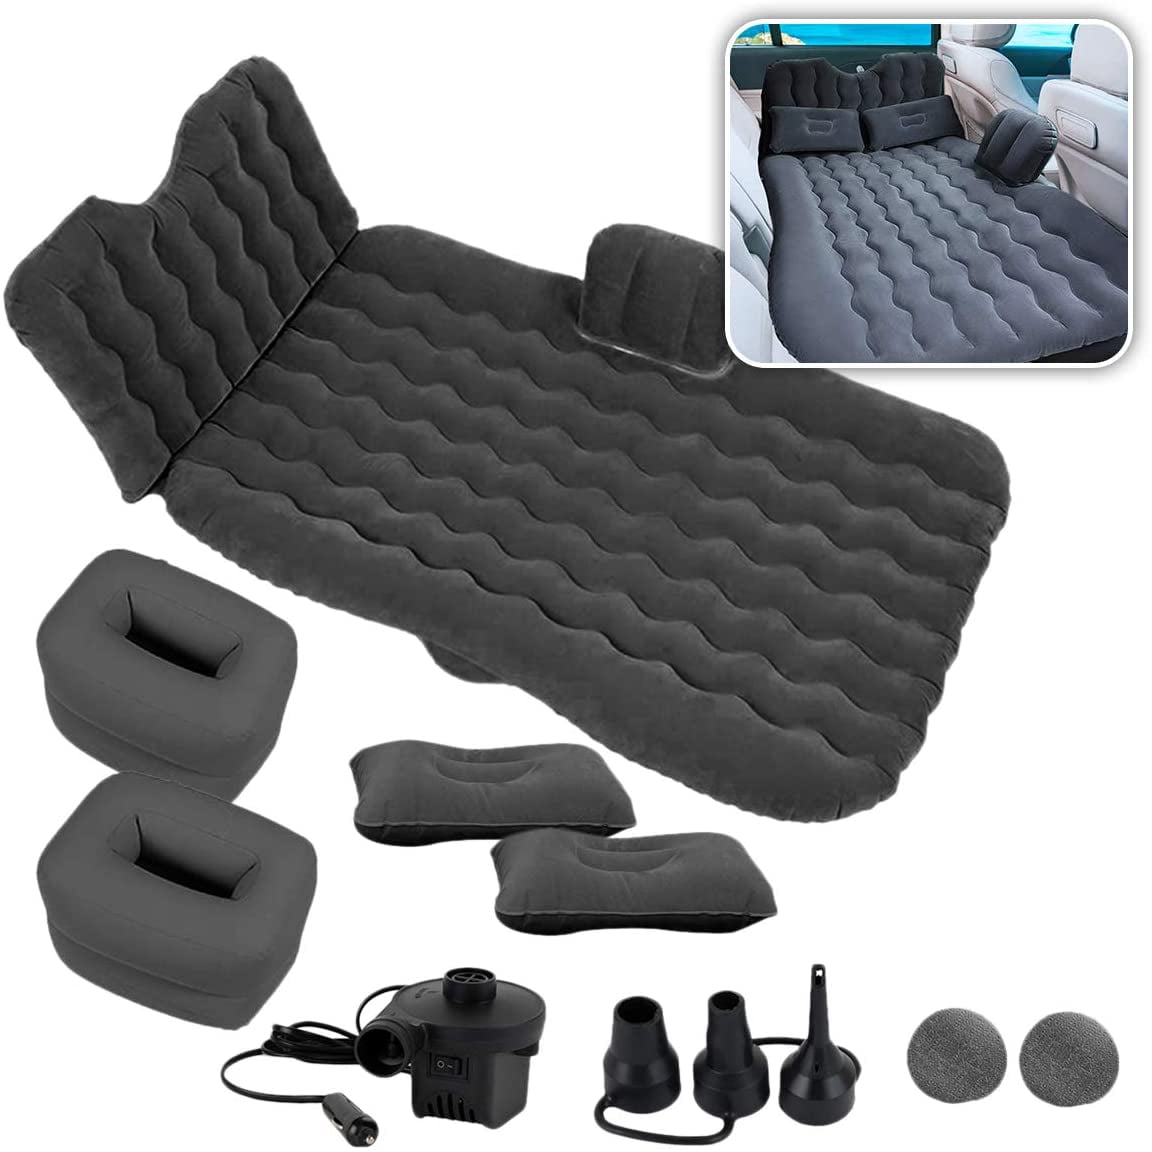 Car Inflatable Bed Back Seat Mattress Airbed for Rest Sleep Travel Camping Pump 